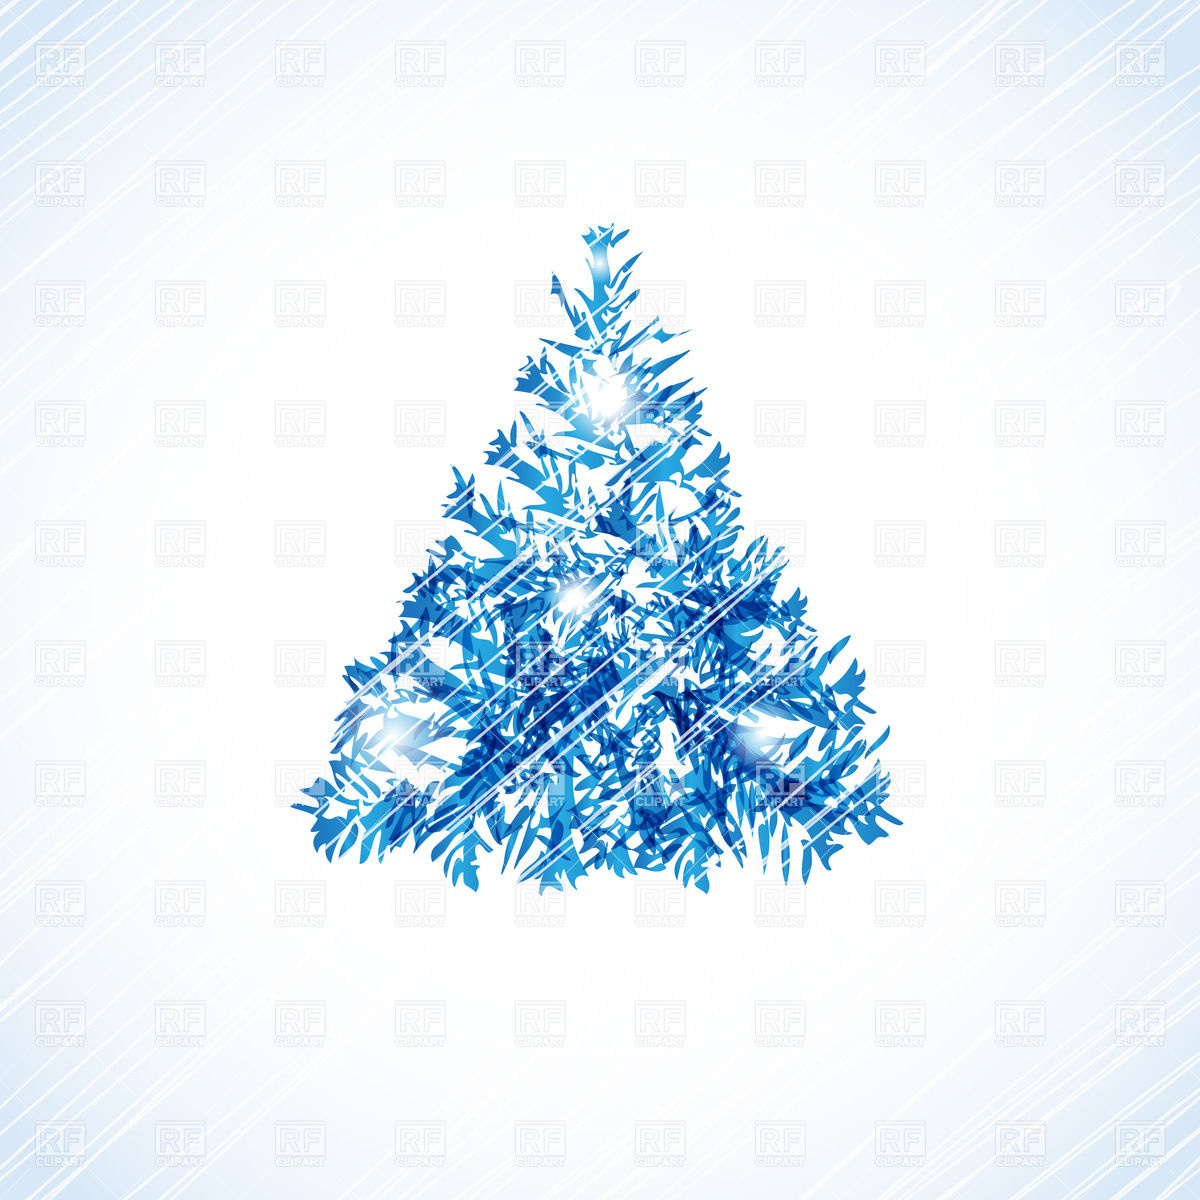 Abstract Christmas Tree Made Of Scratches And Scribbles Download